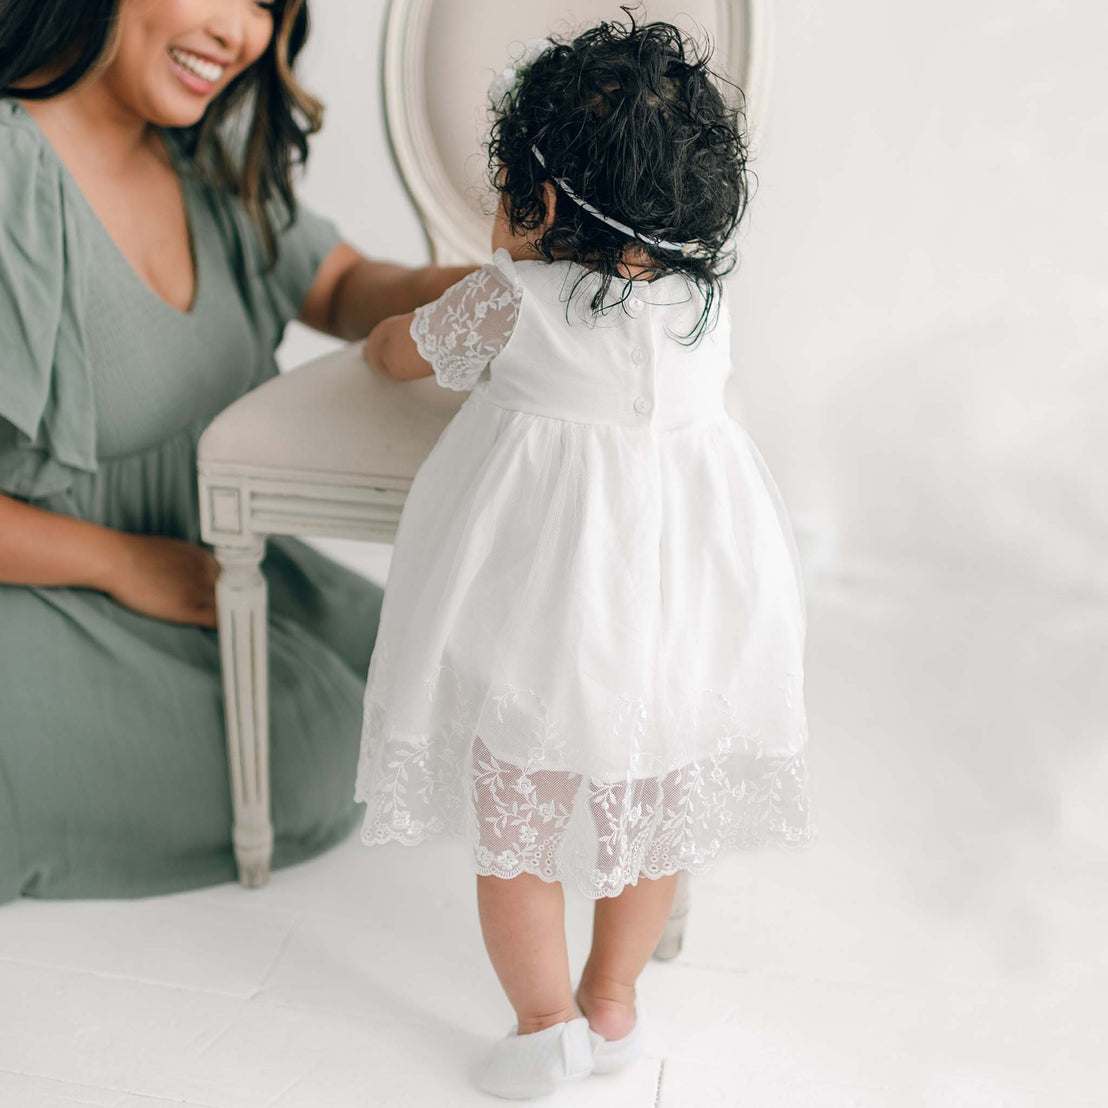 A smiling woman sits beside a toddler in an Ella Romper Dress, who stands next to a white bench. The room has a bright, soft background.